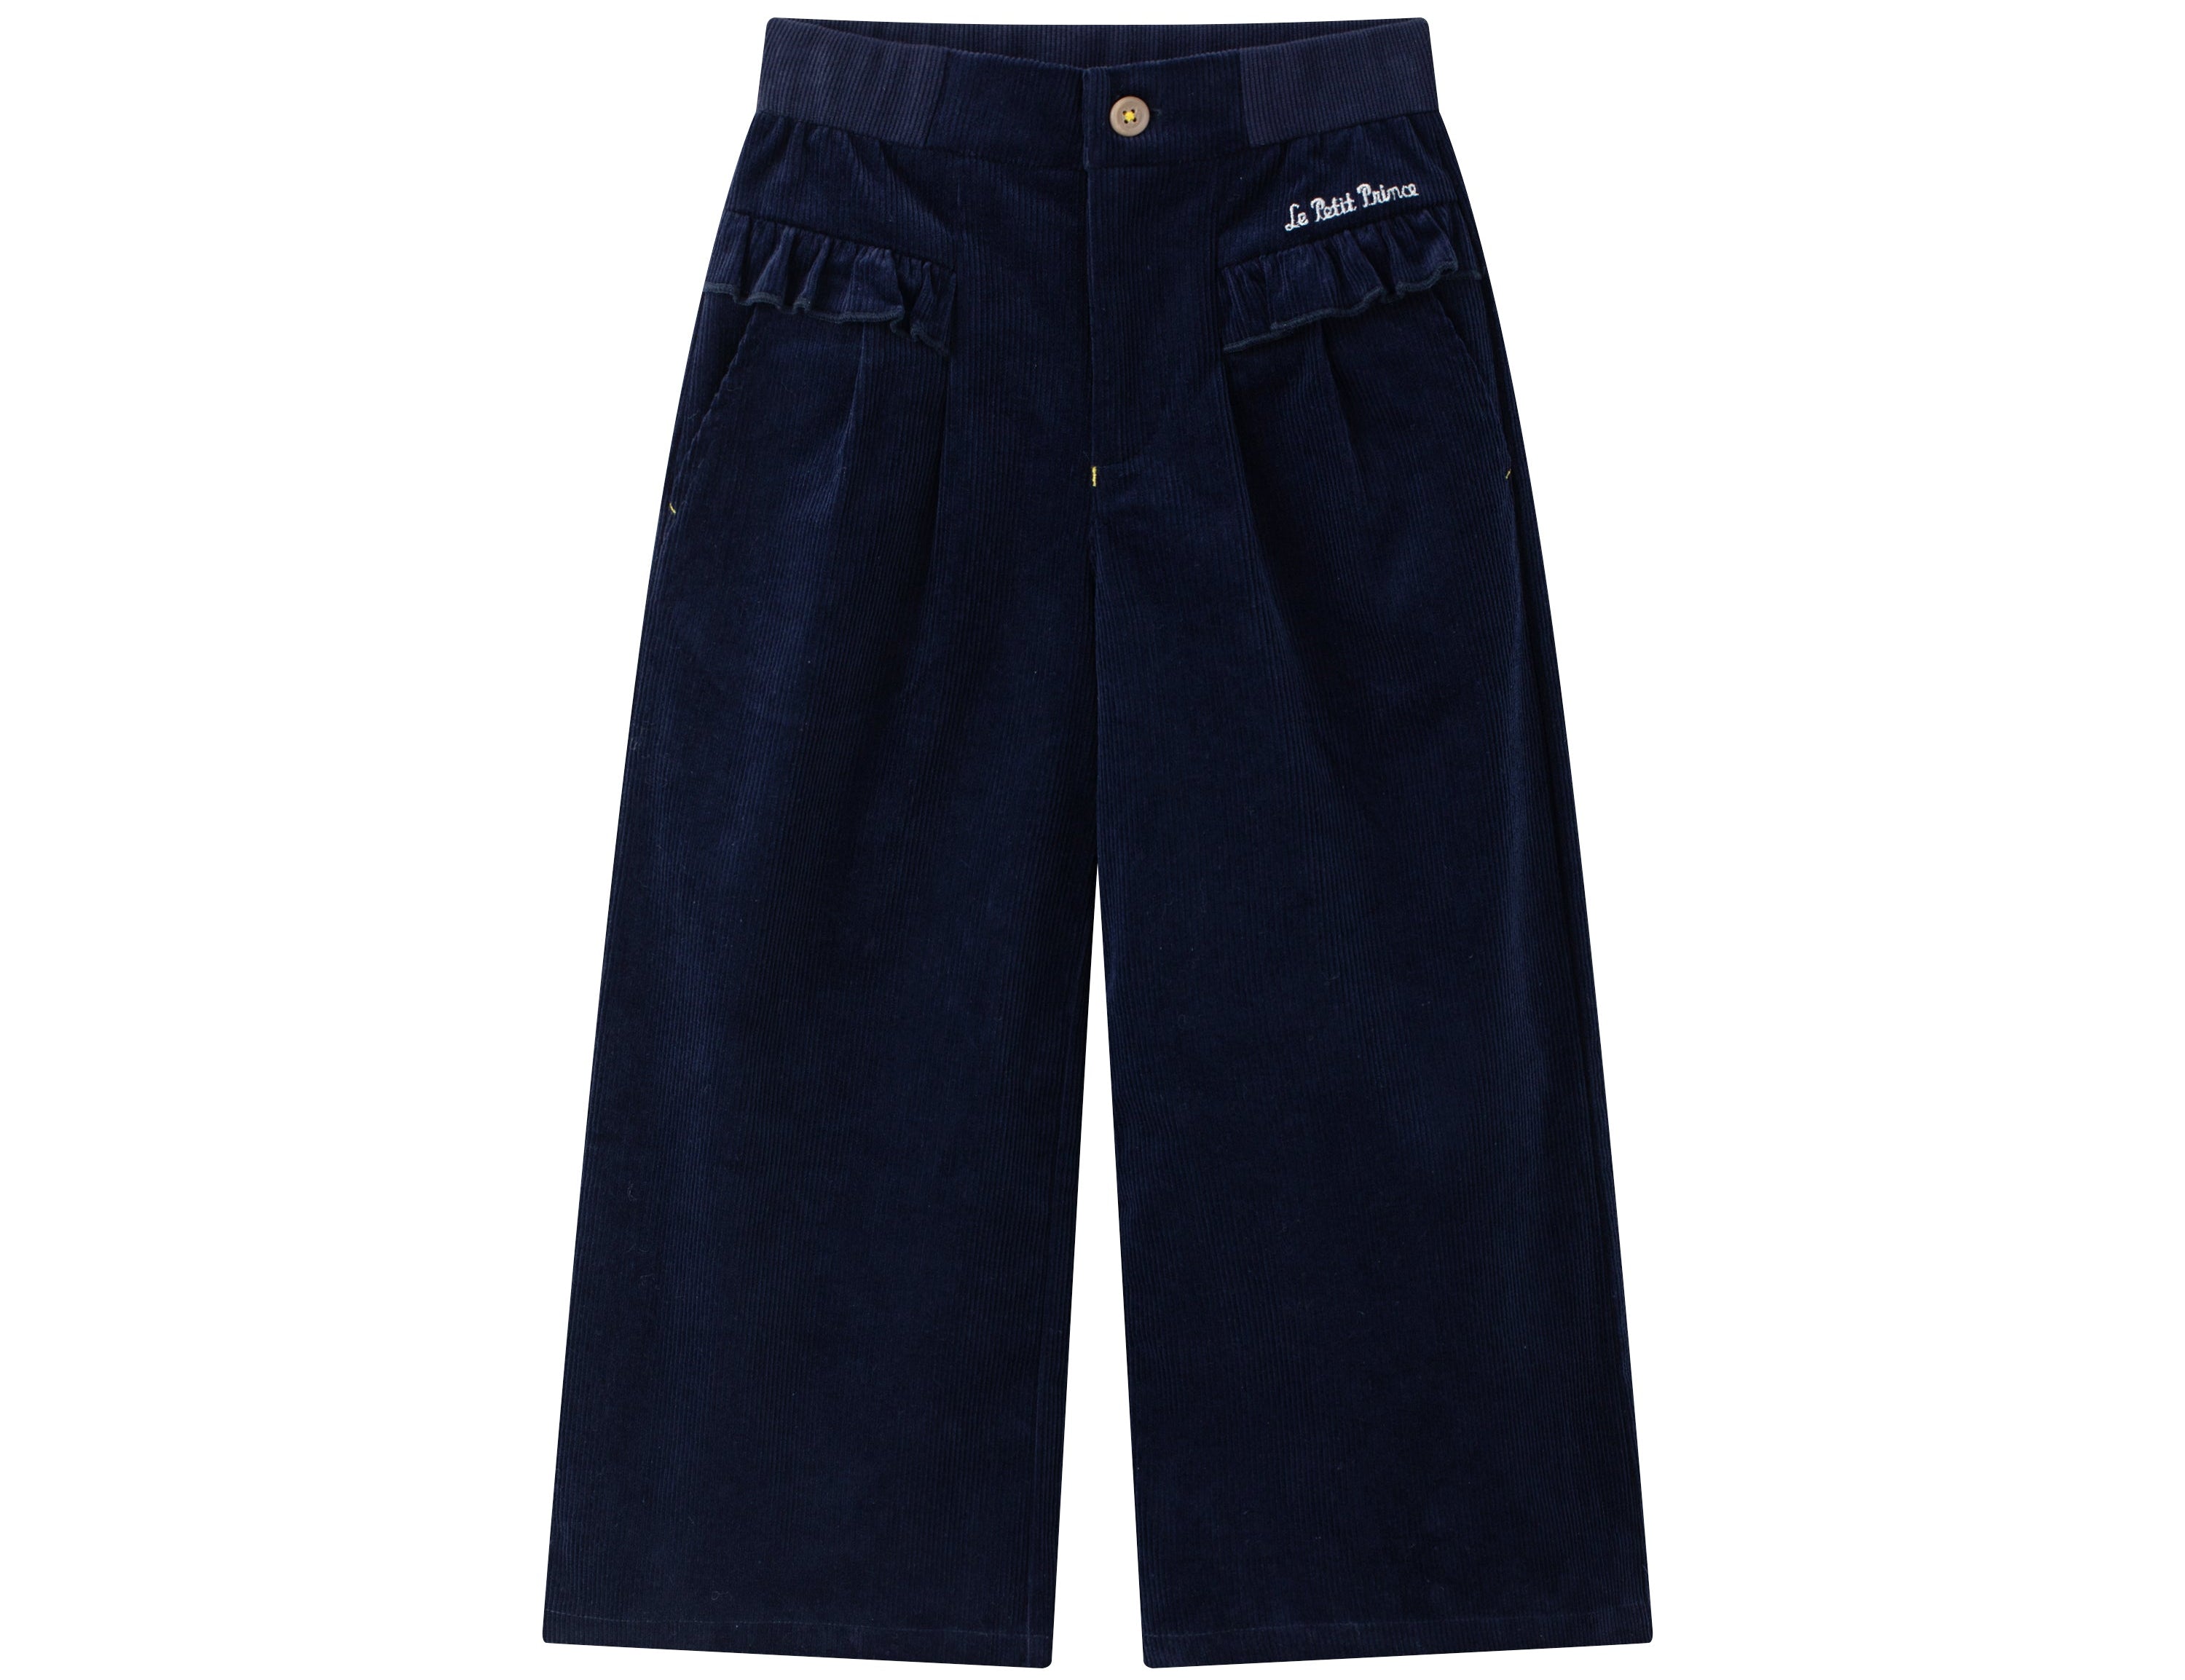 Vauva x Le Petit Prince - Girls Embroidered Corduroy Pants product image front